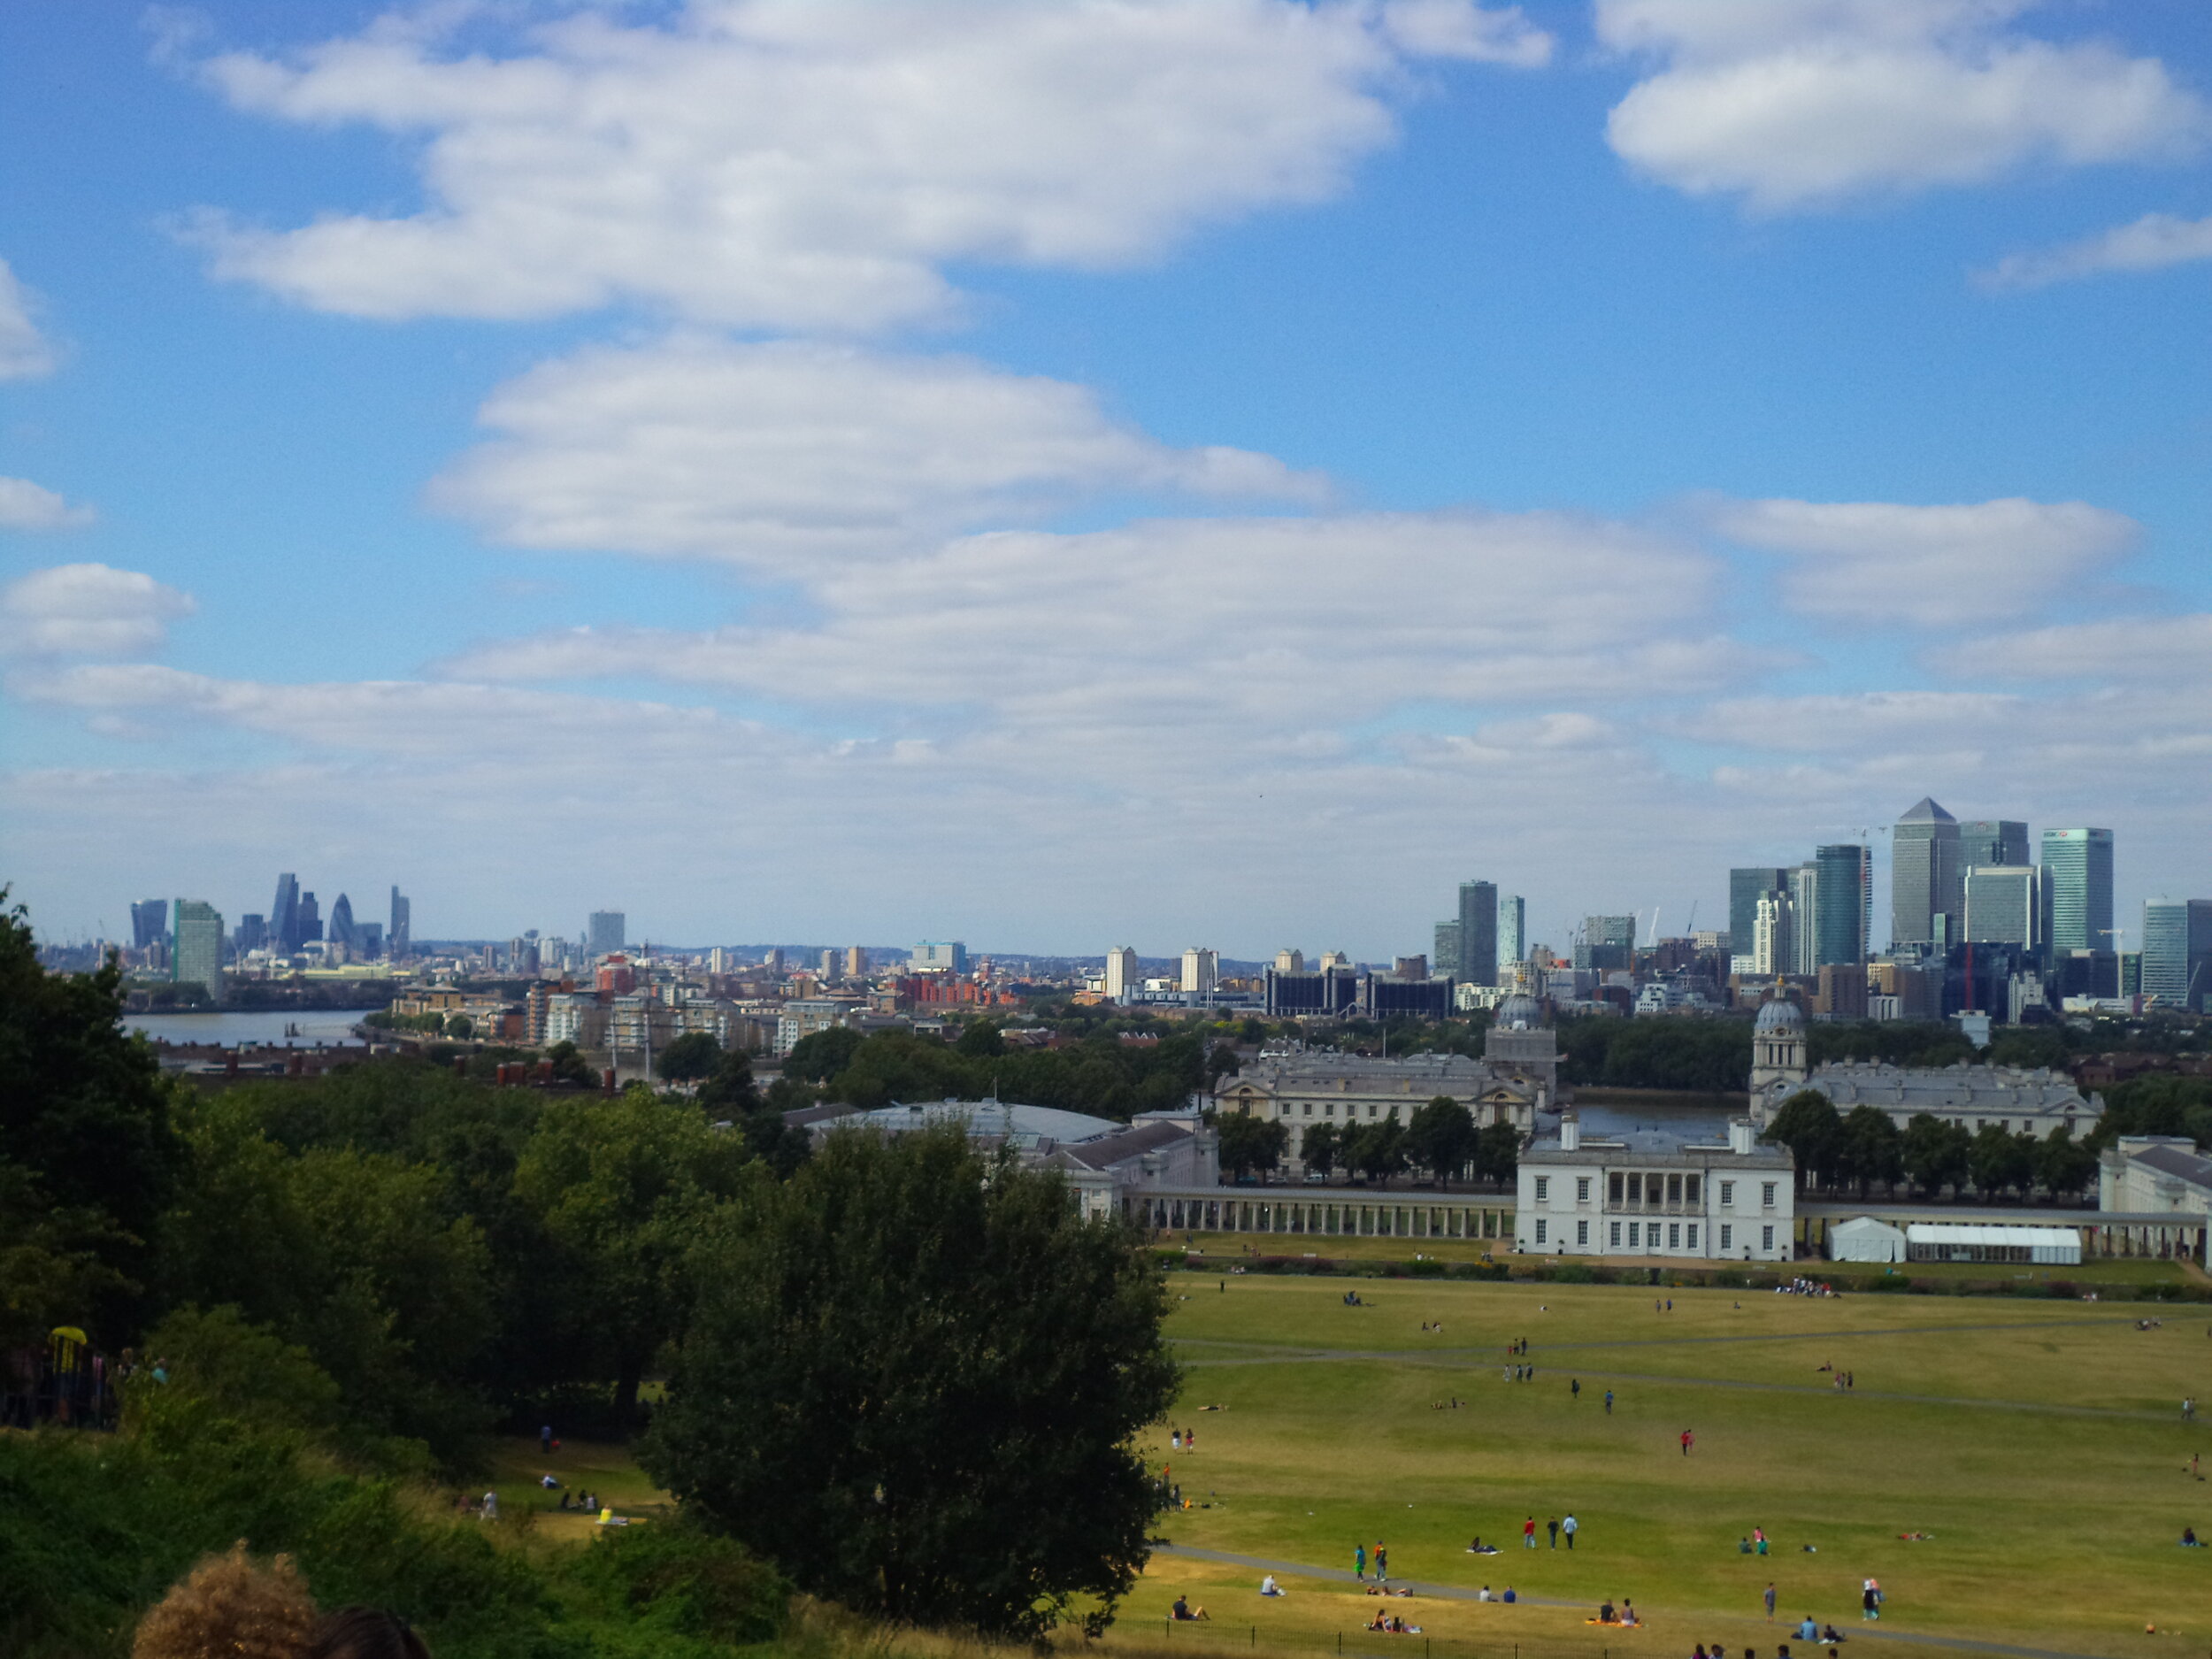 The view from Greenwich Park